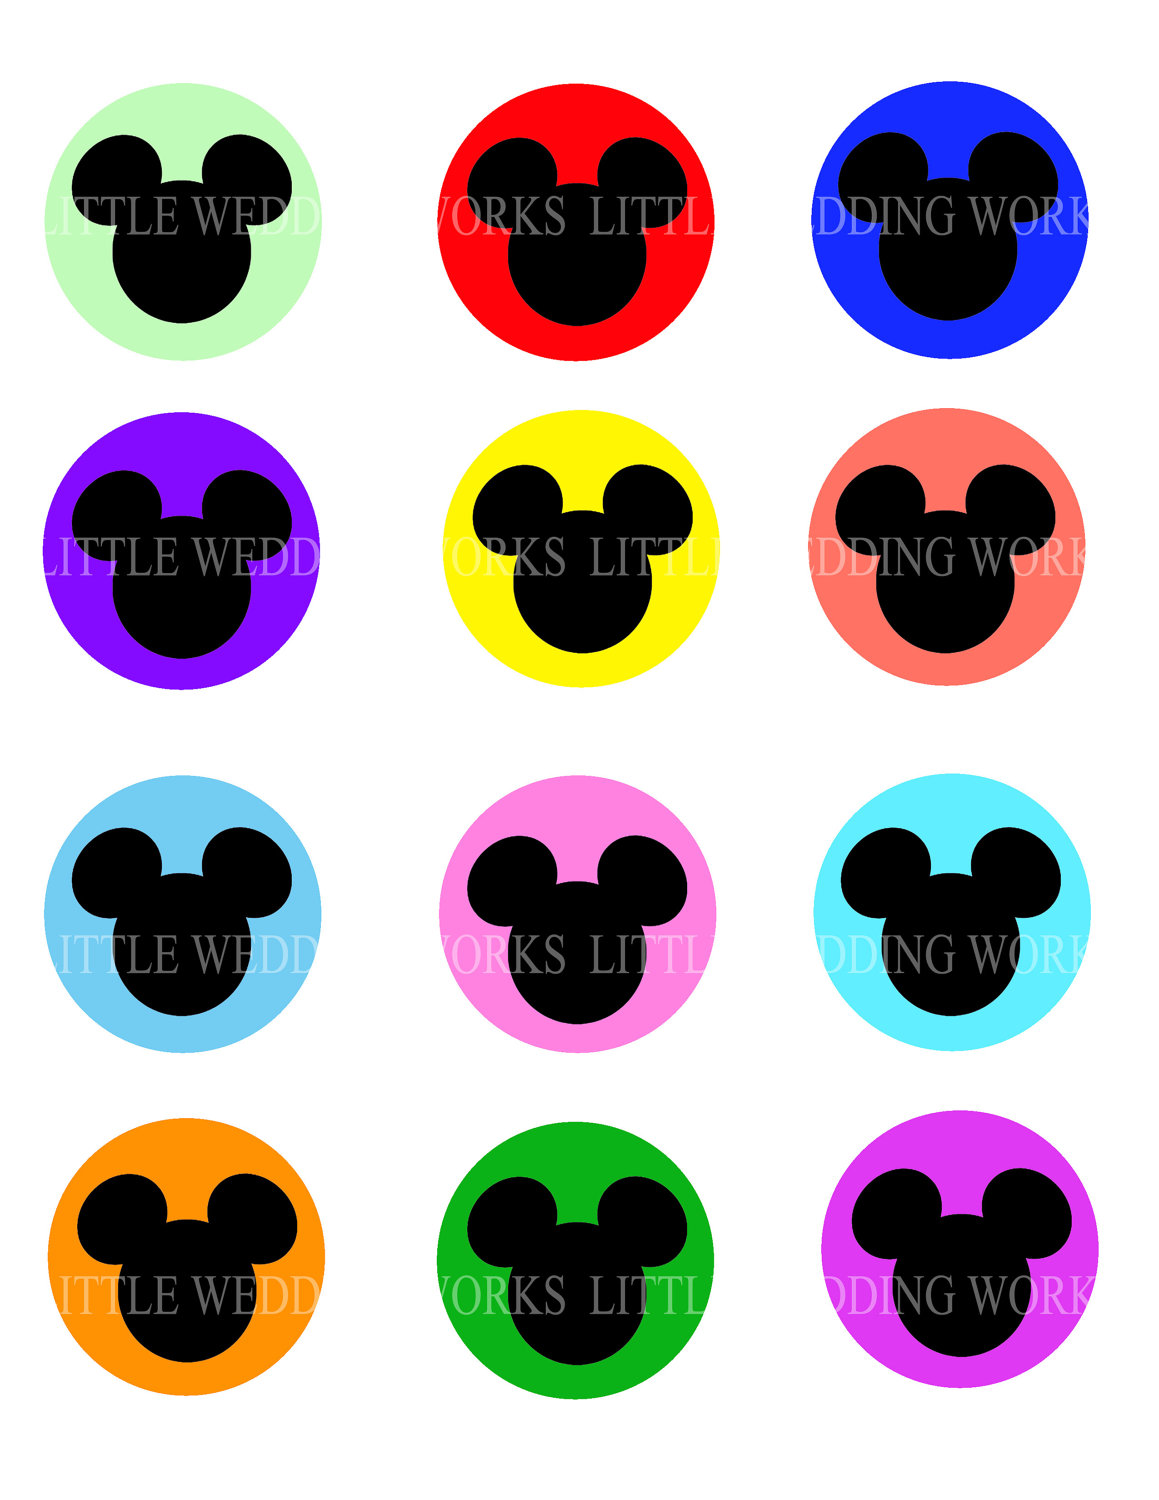 Mickey Mouse Ears Wallpapers